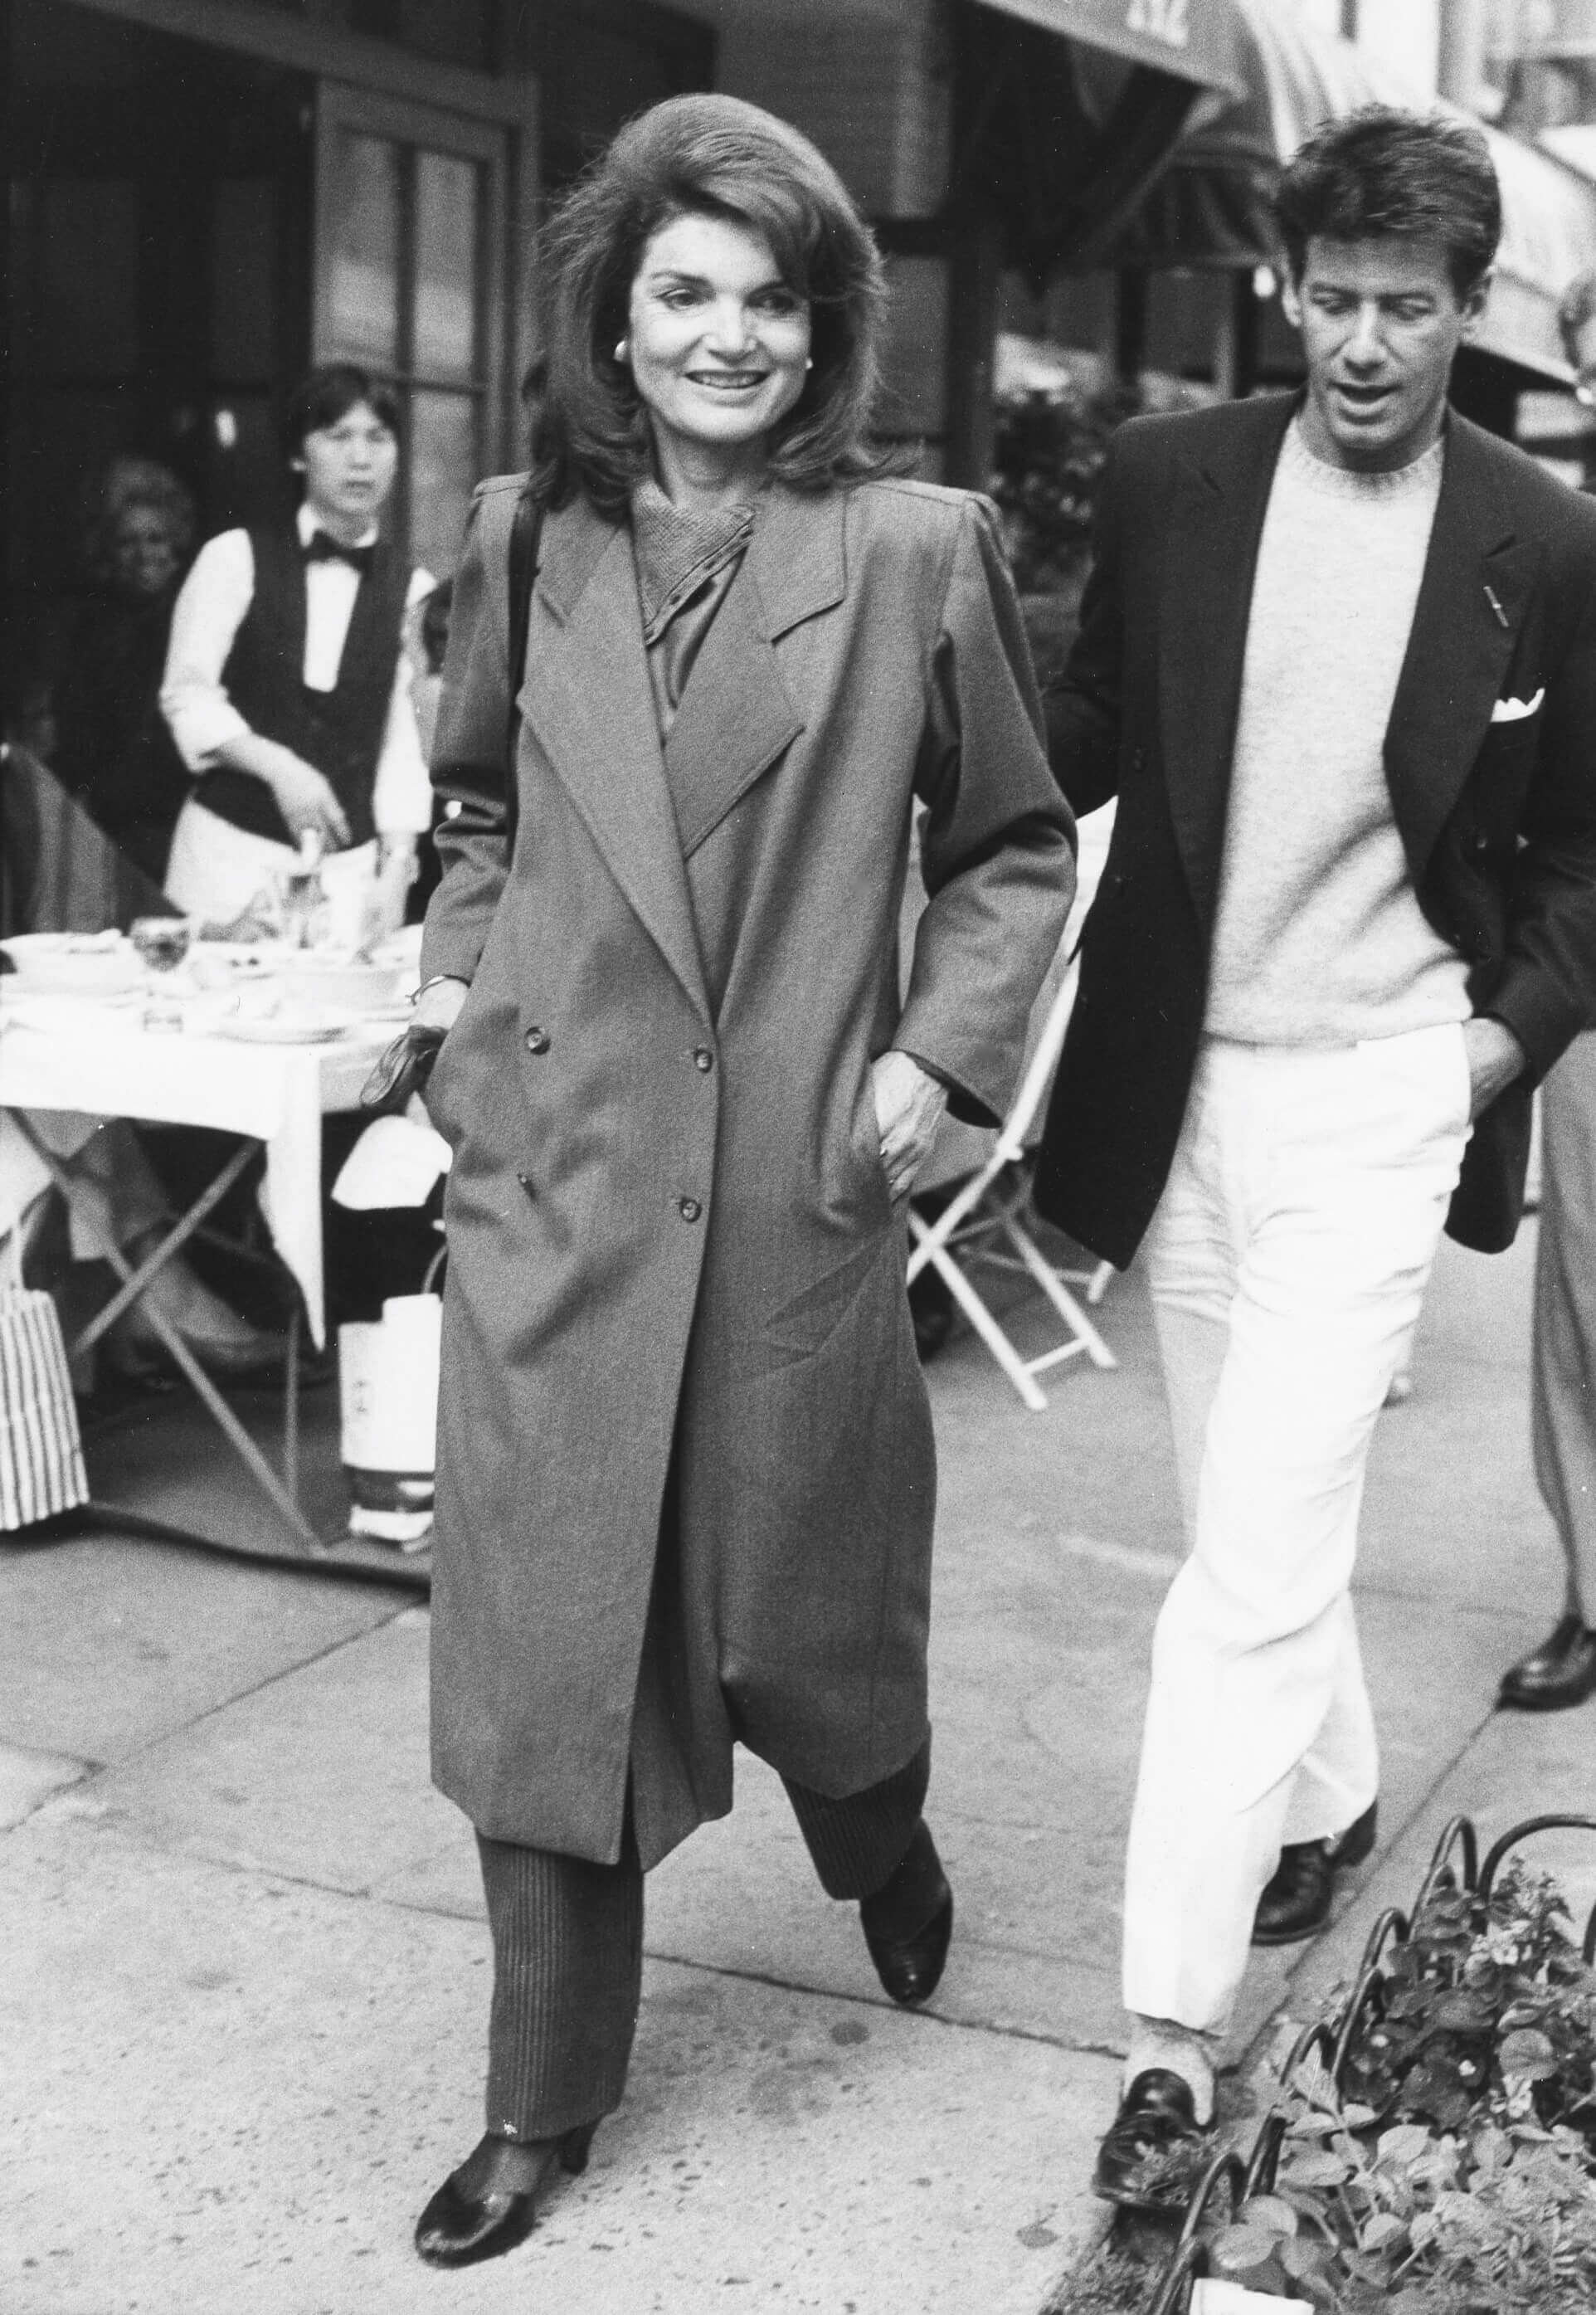 Image 4 Jacqueline Kennedy Onassis & Calvin Klein NYC 1987 - THE TIMES OF BILL CUNNINGHAM - Courtesy of Greenwich Entertainment (1).jpg